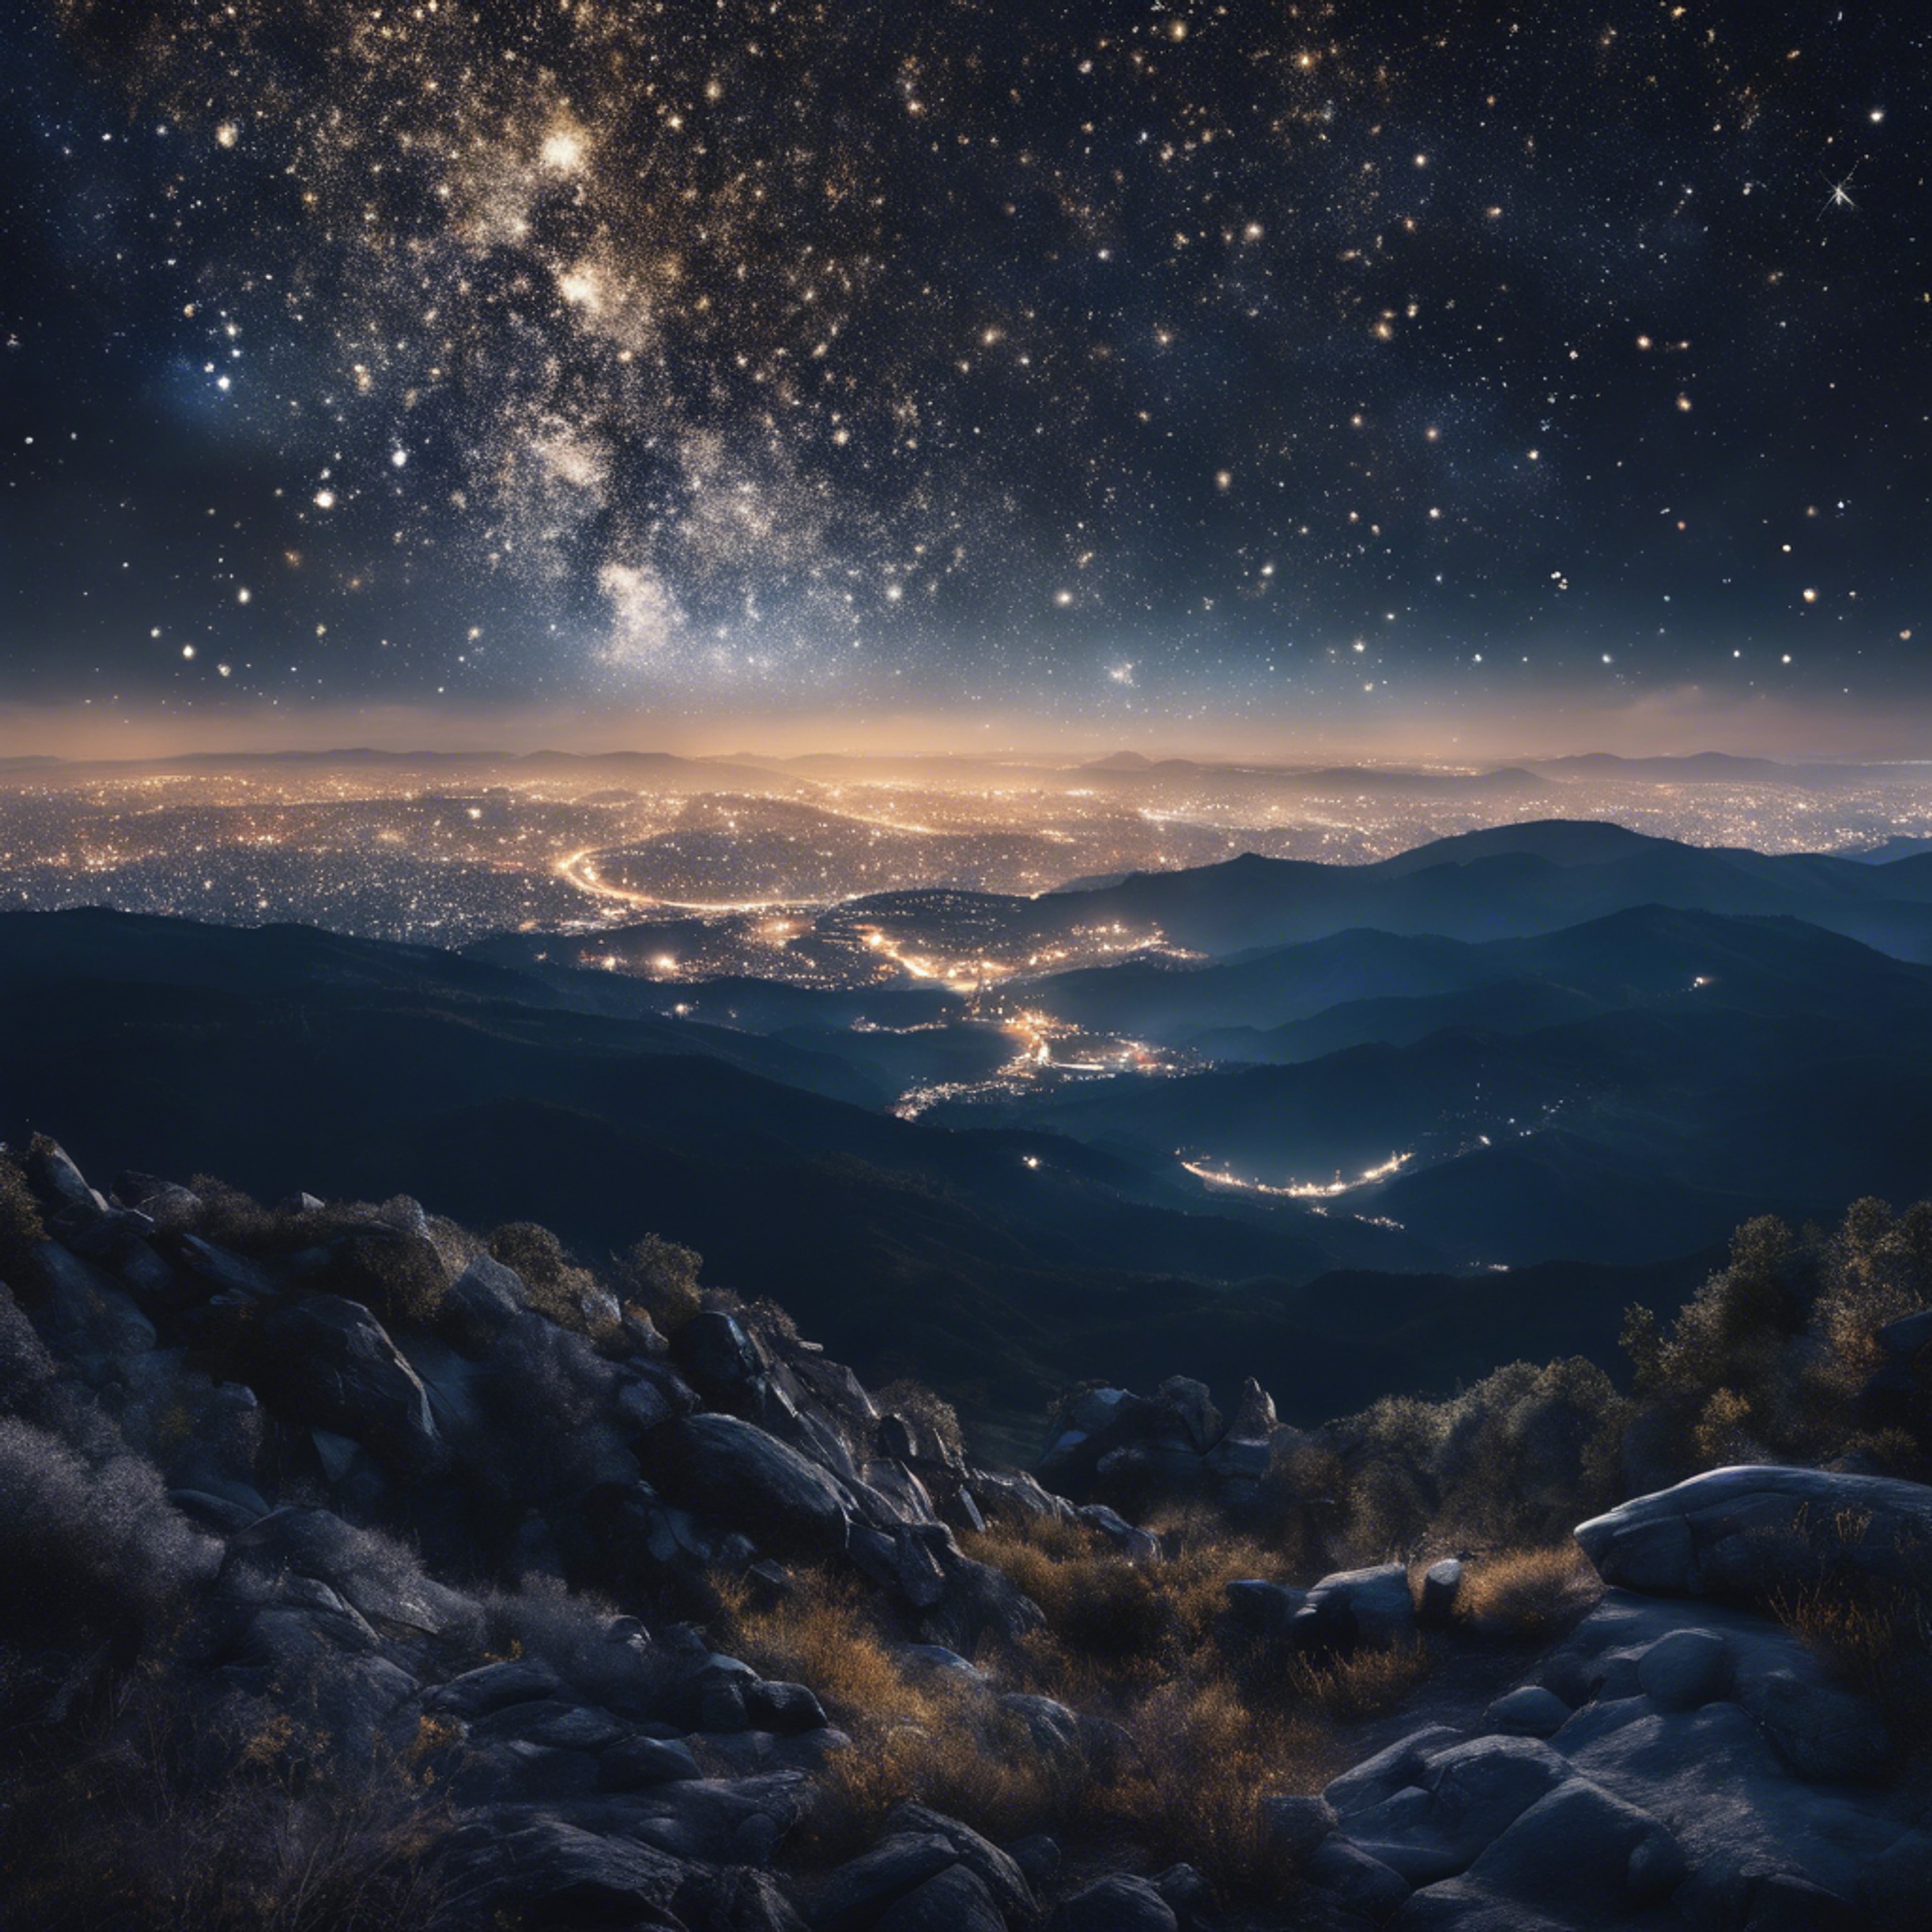 A midnight scene viewed from a tall mountain, showcasing millions of glittering stars embedded in the vast canvas of the night sky.壁紙[5aeeb7a05a85407b9436]